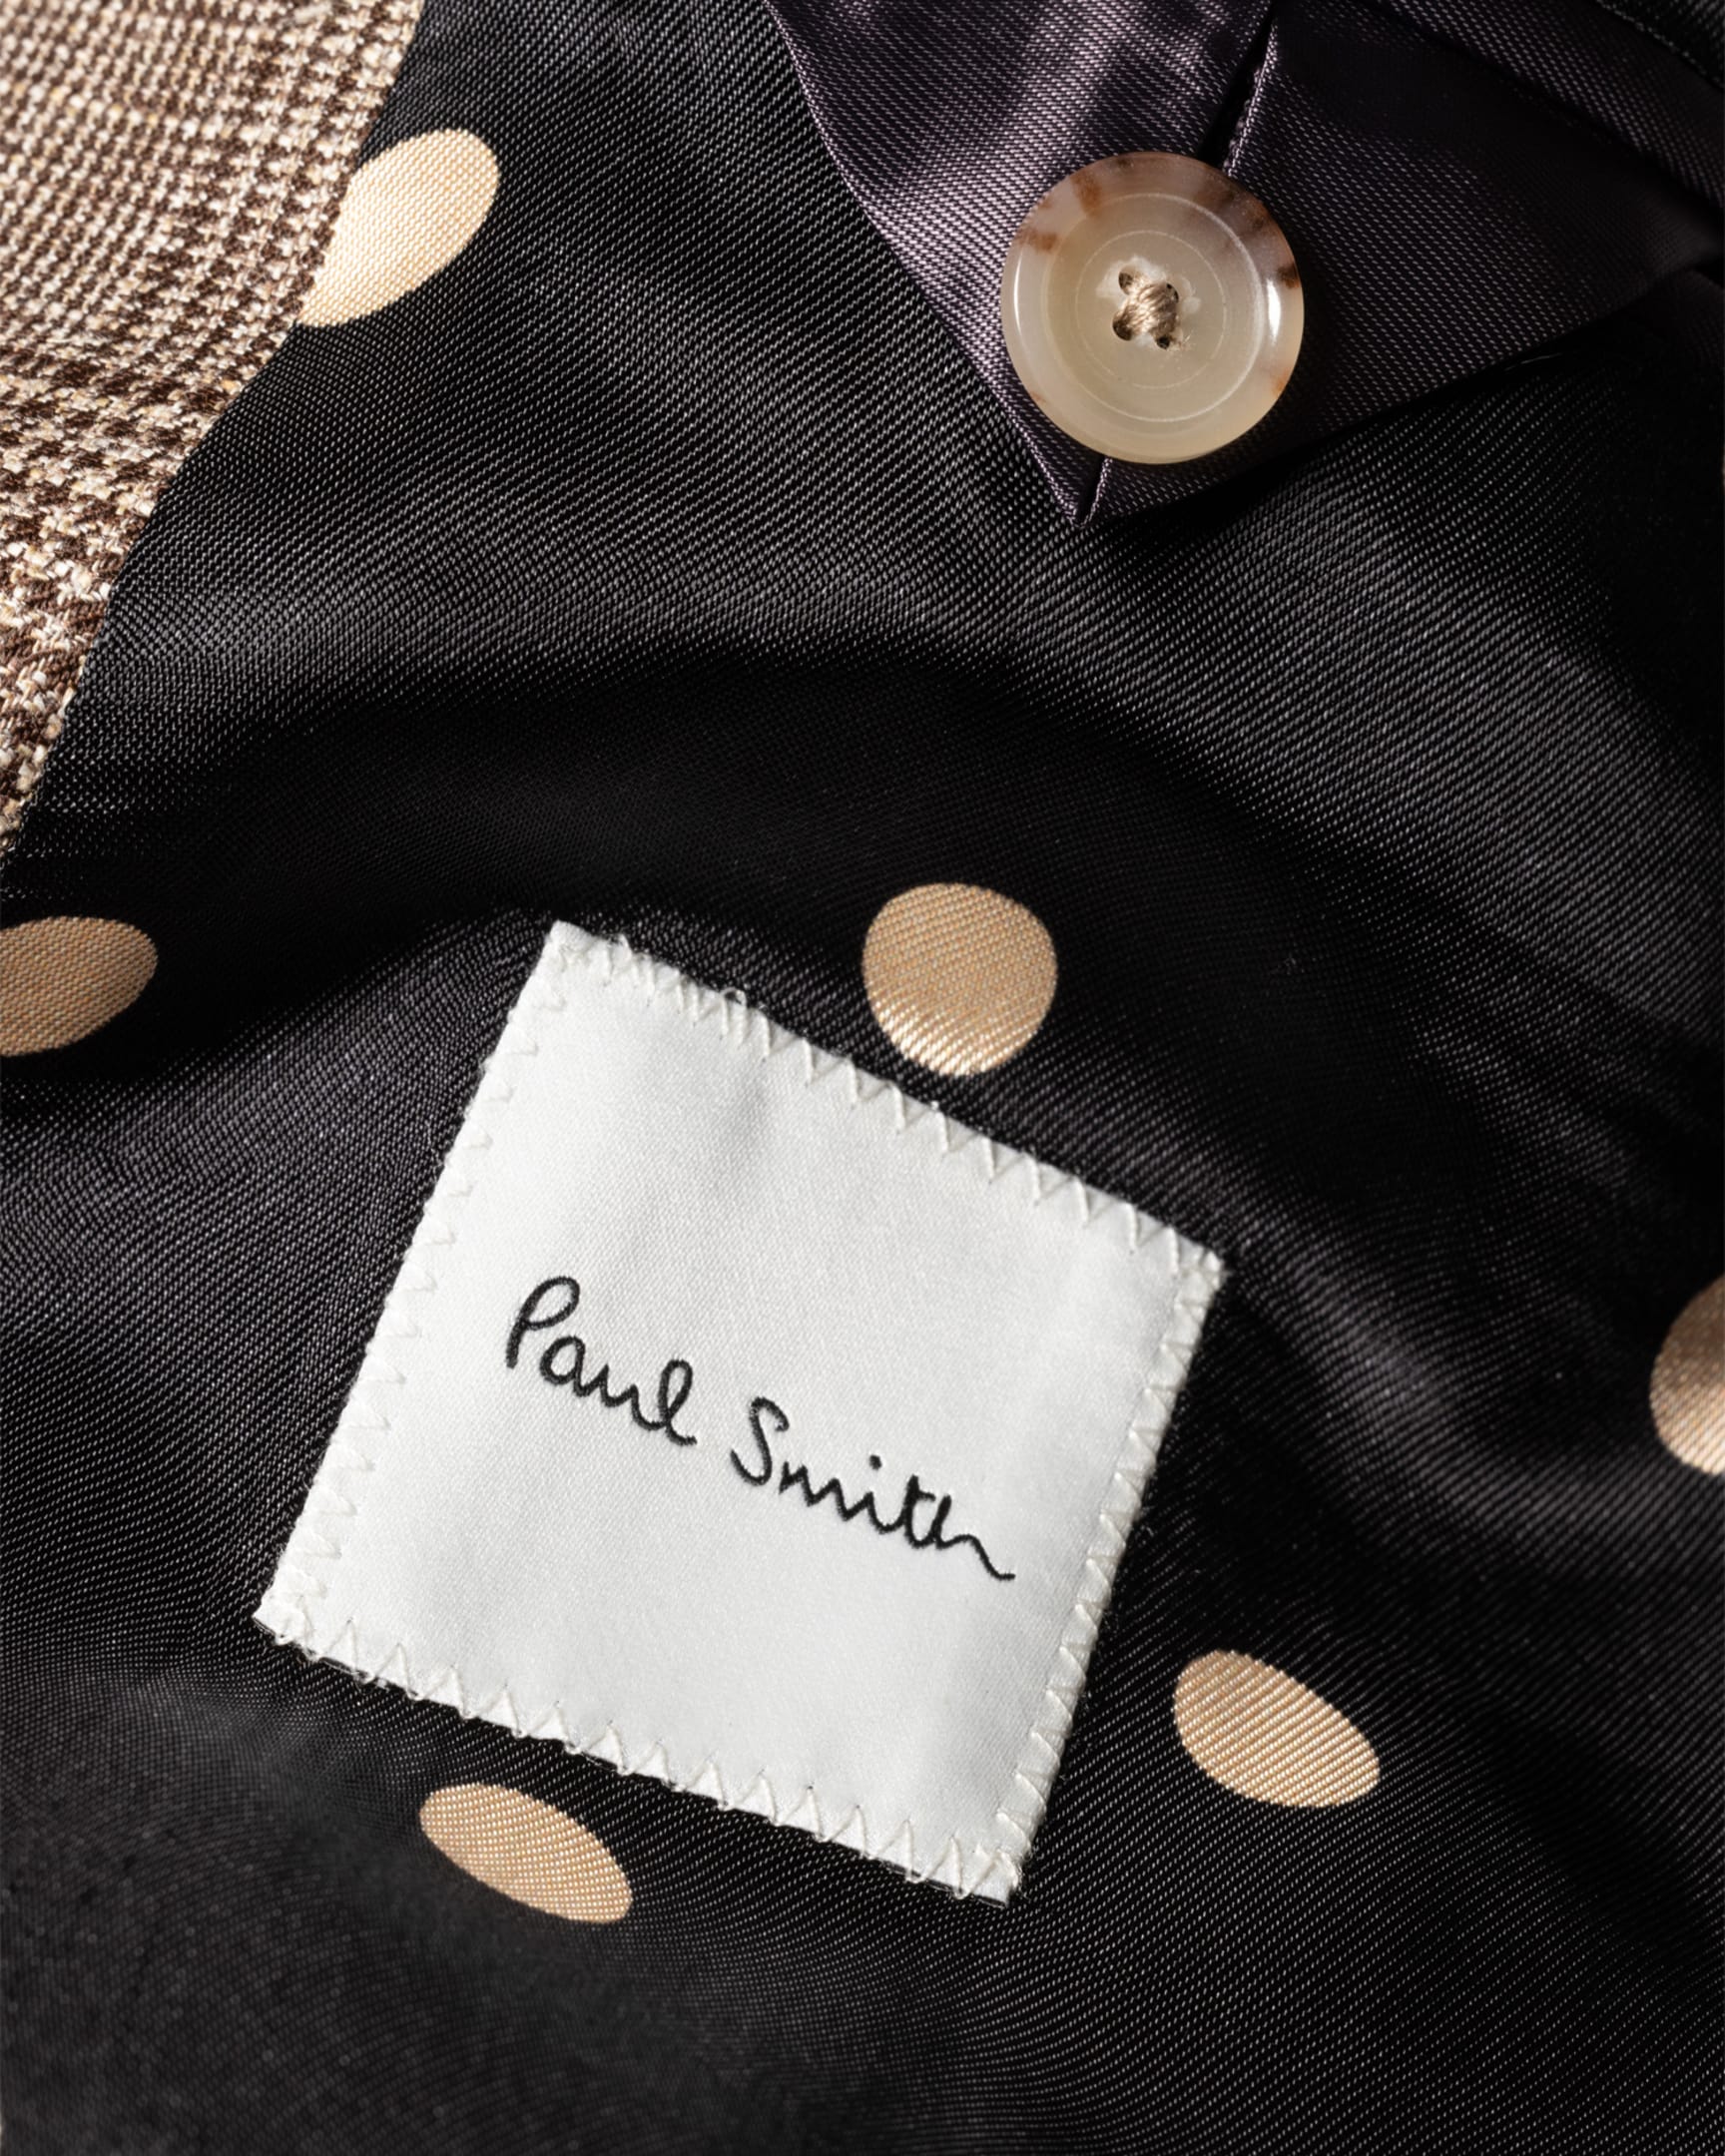 Detail View - Brown Houndstooth Check Wool-Linen Blazer Paul Smith